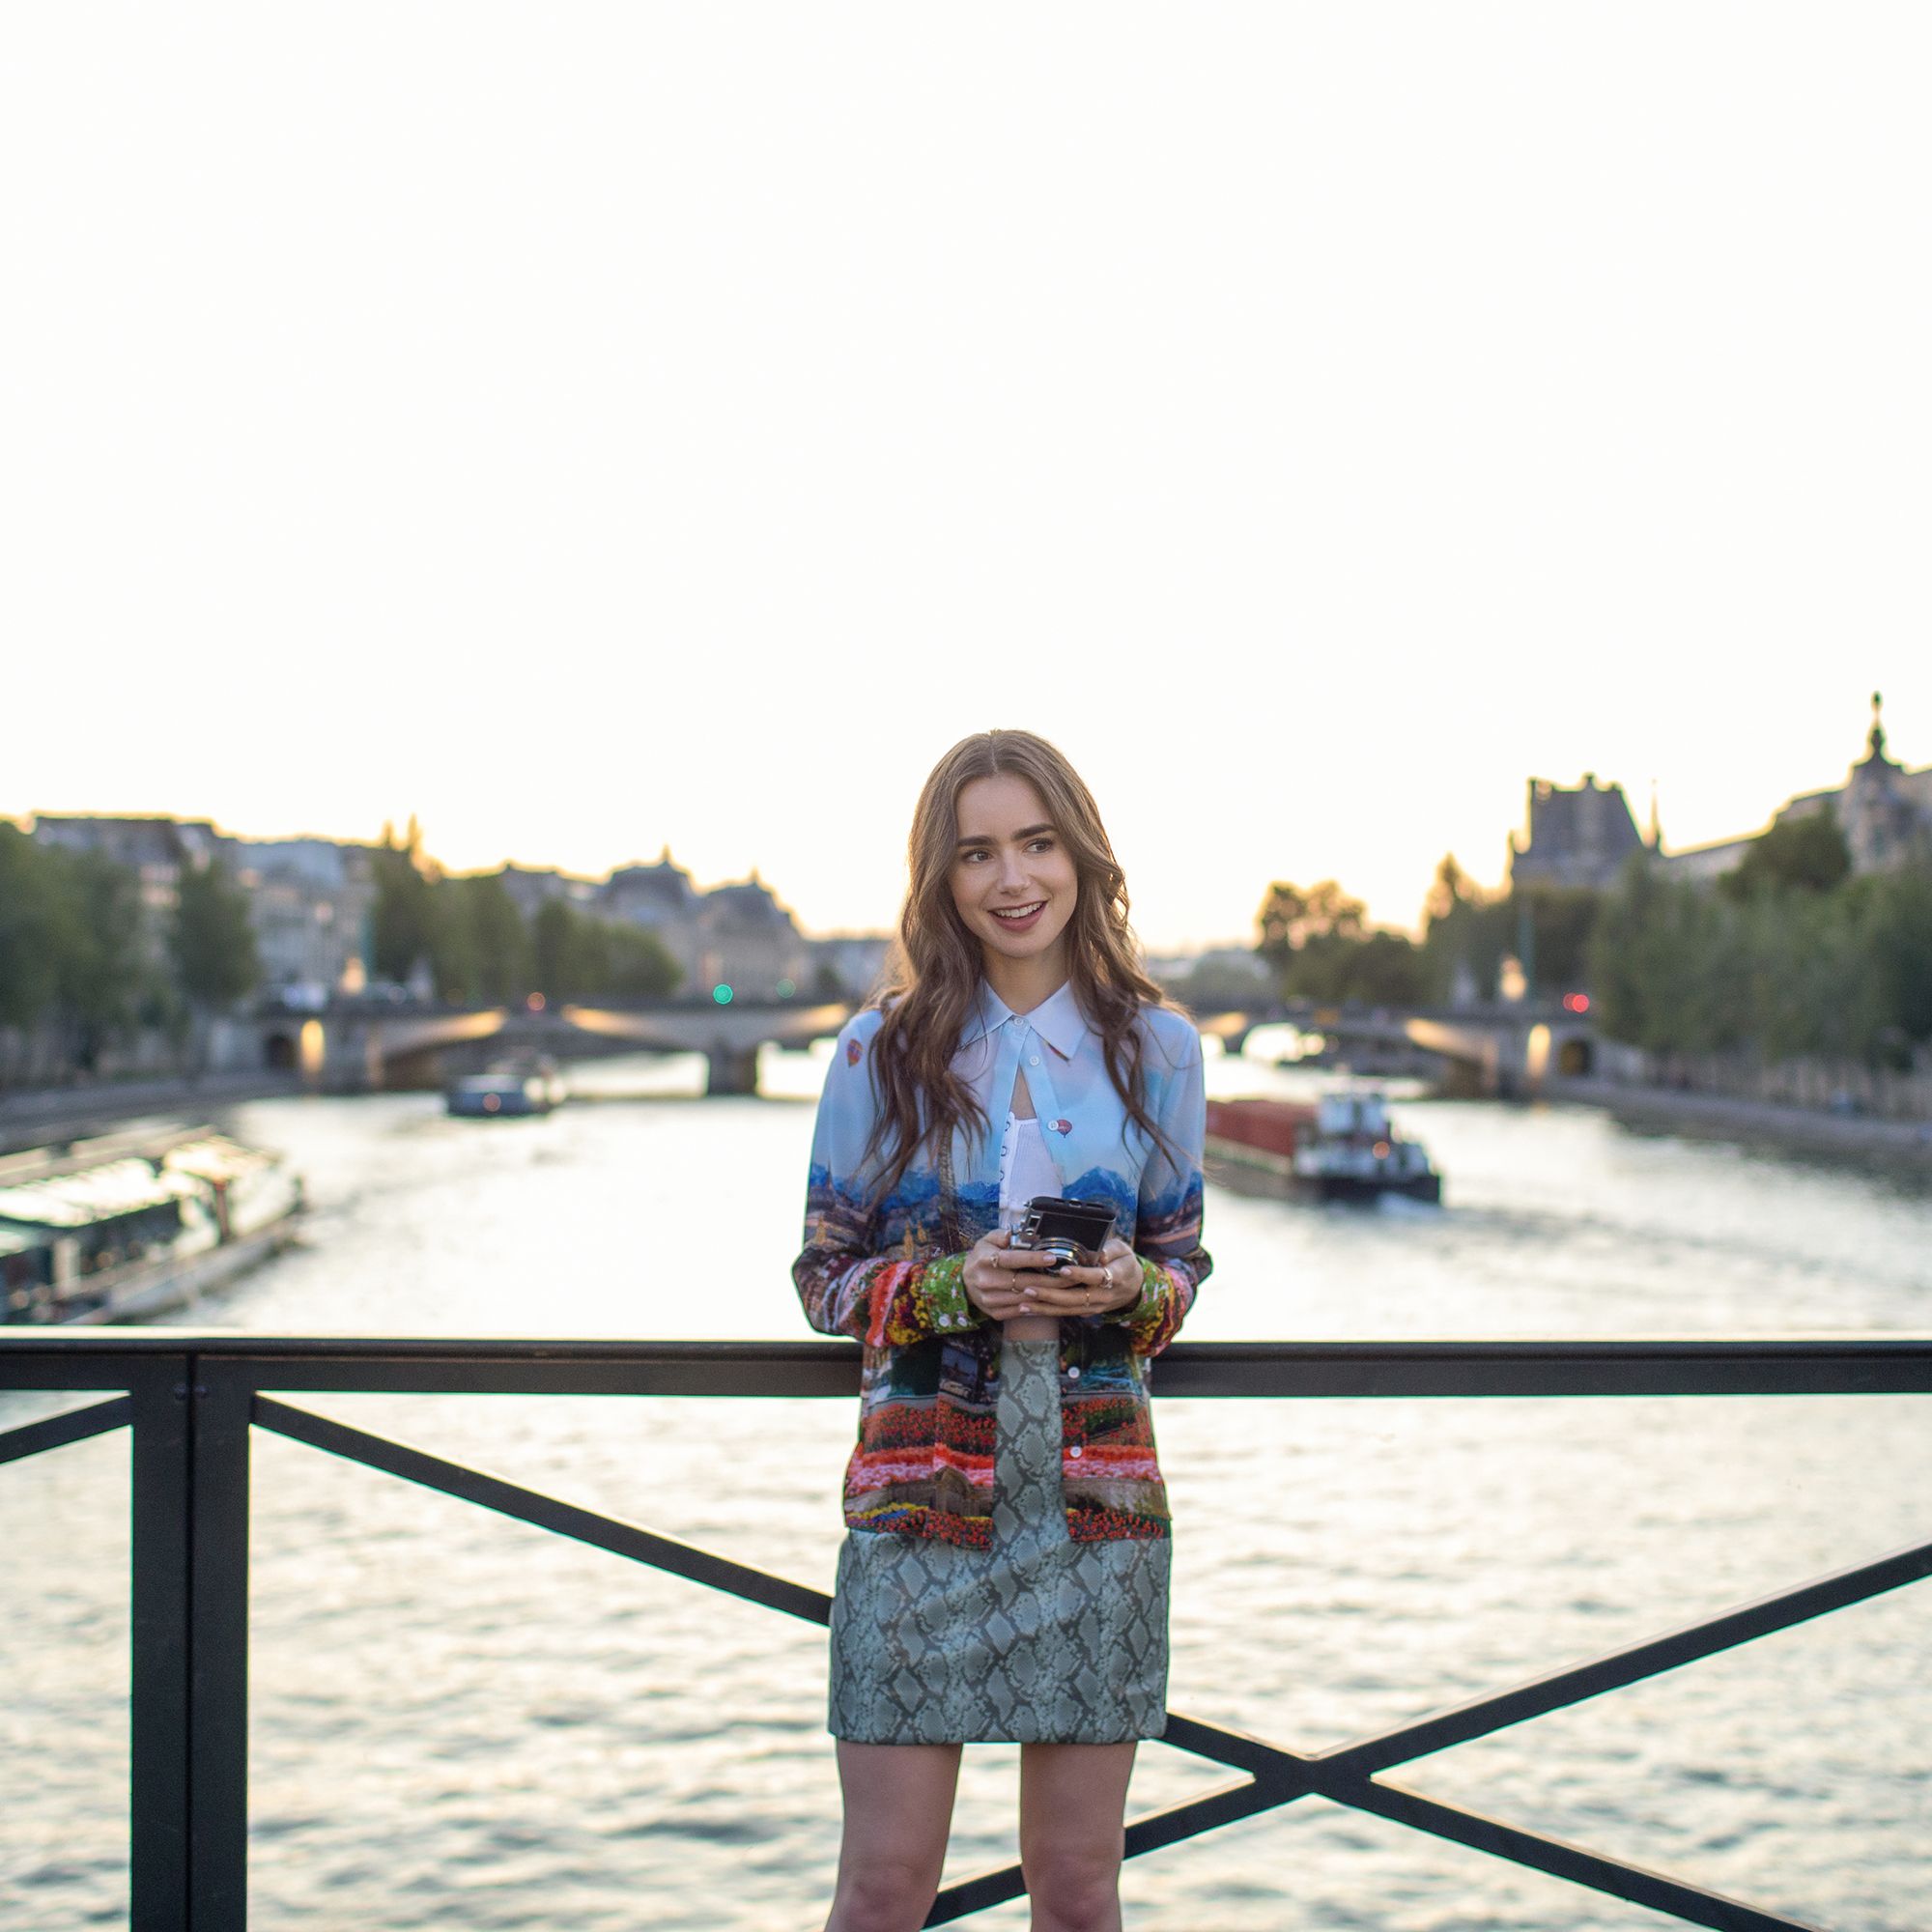 Is Fashion's Most Polarizing Figure Emily in Paris?